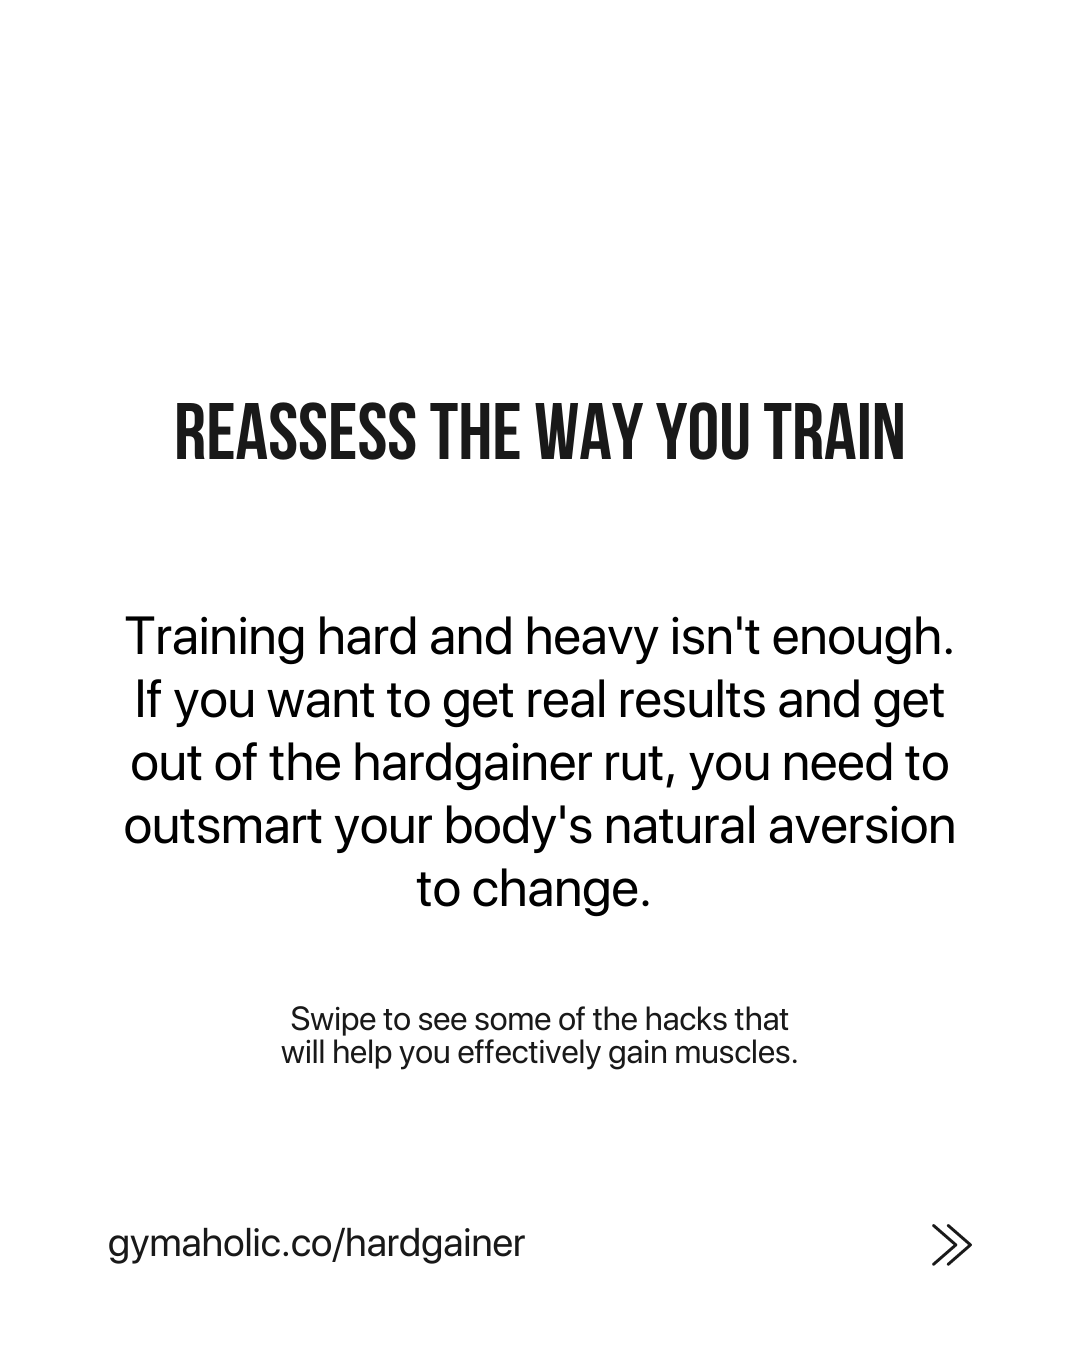 Effective muscle building isn’t only about going hard and heavy in the gym. It